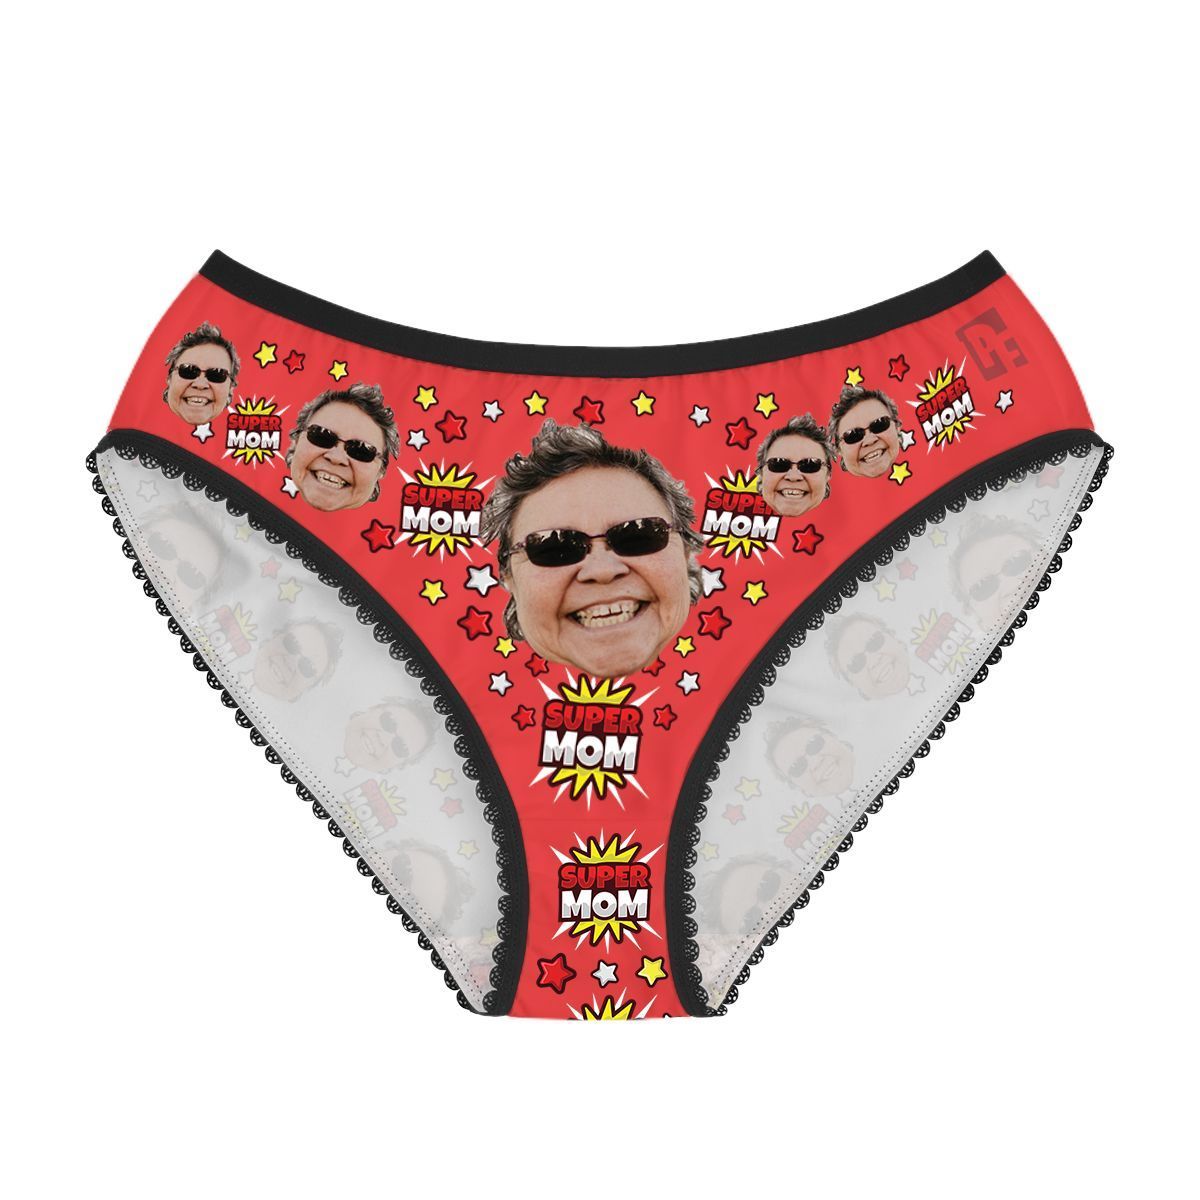 Red Super mom women's underwear briefs personalized with photo printed on them